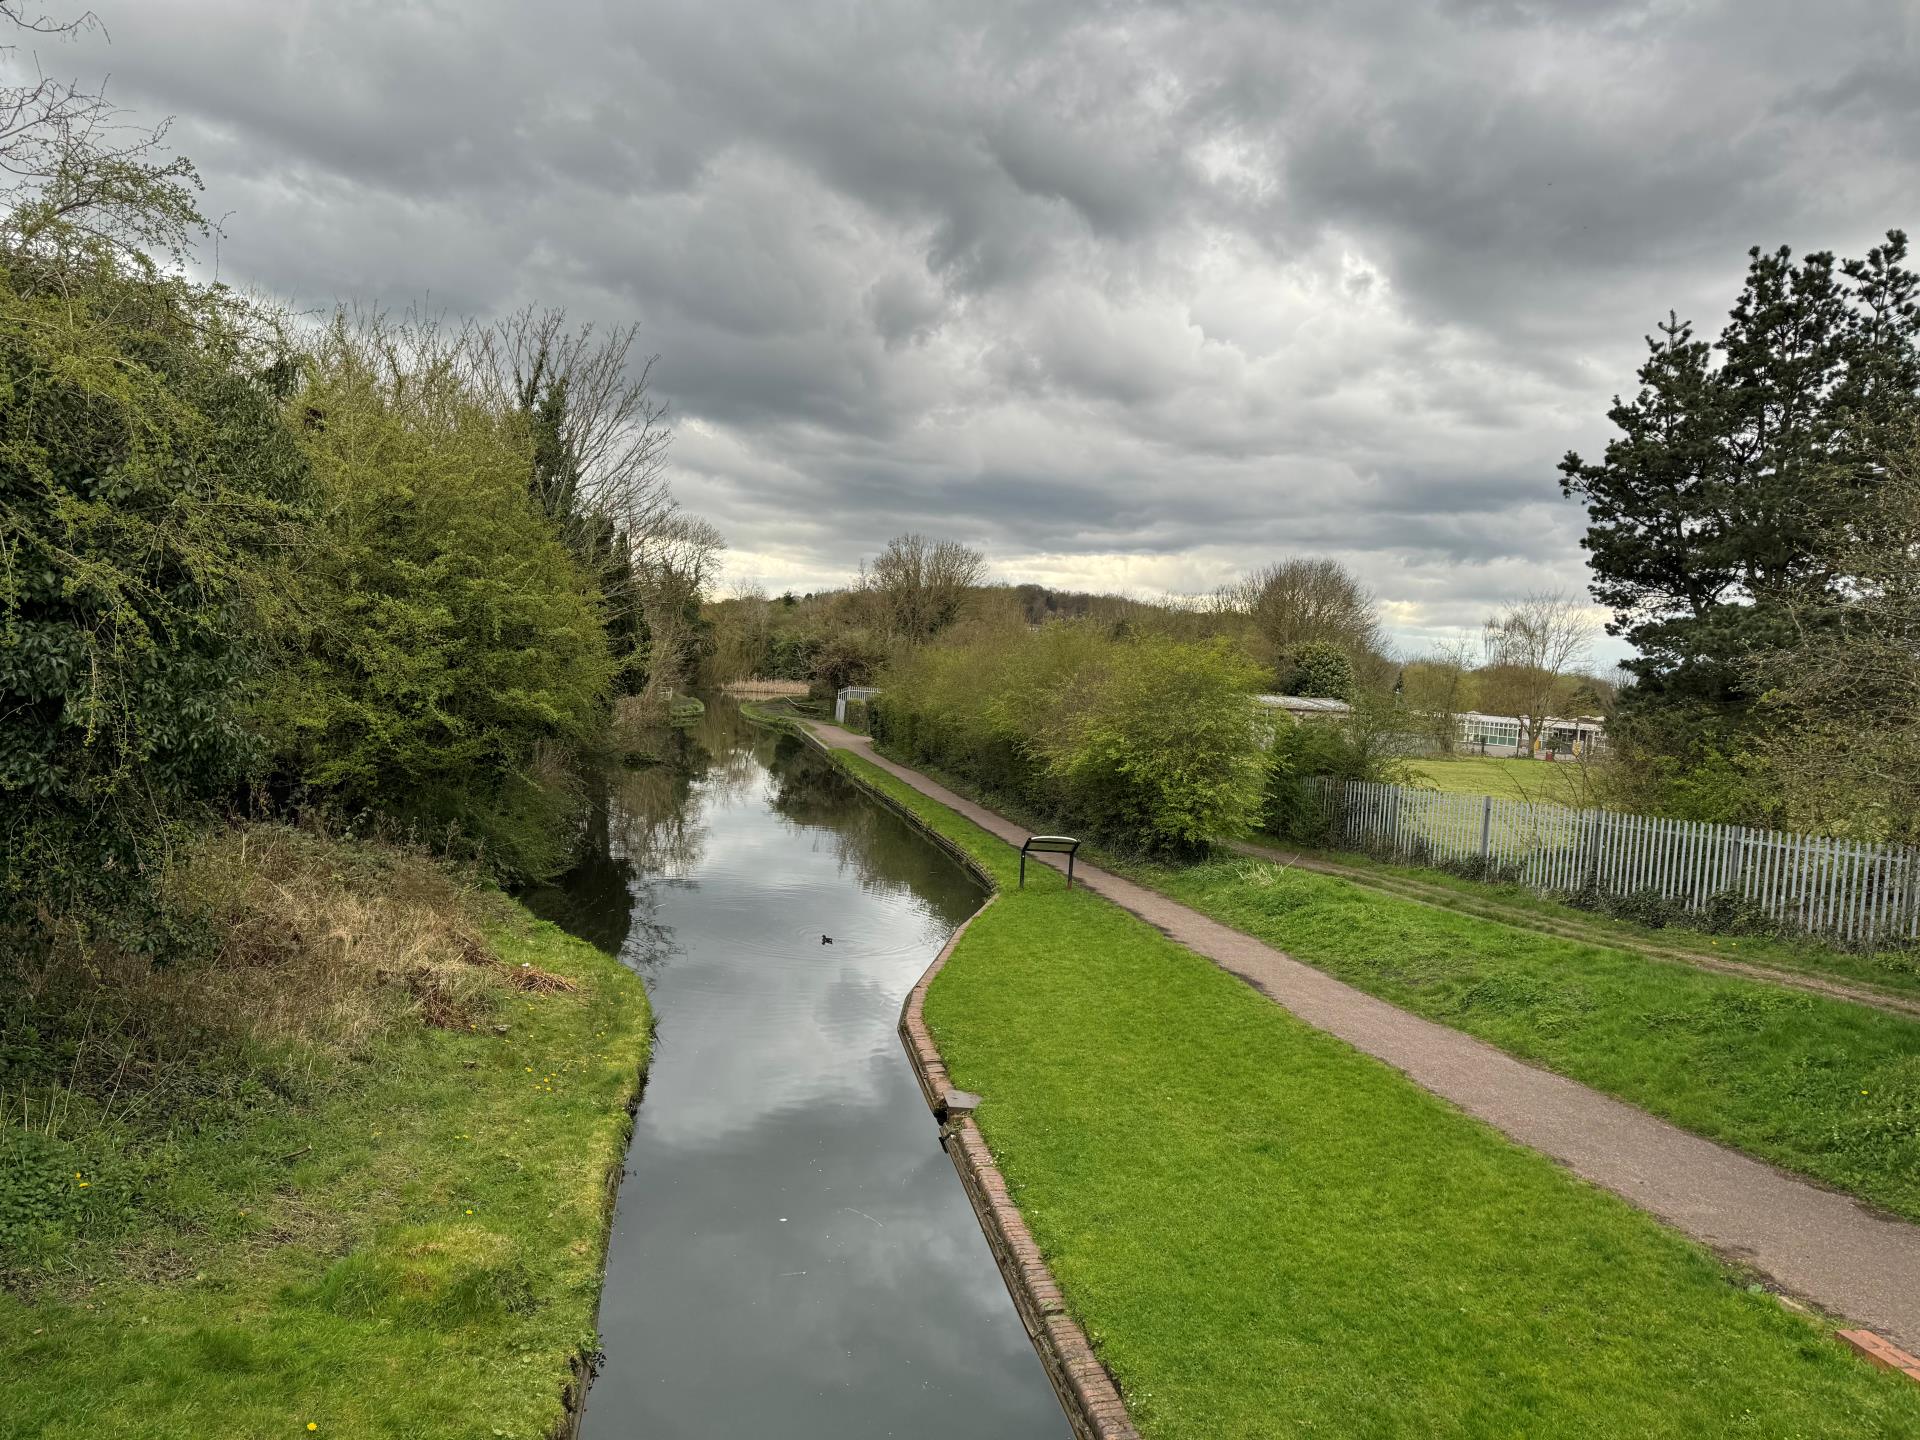 Another image of the canal.